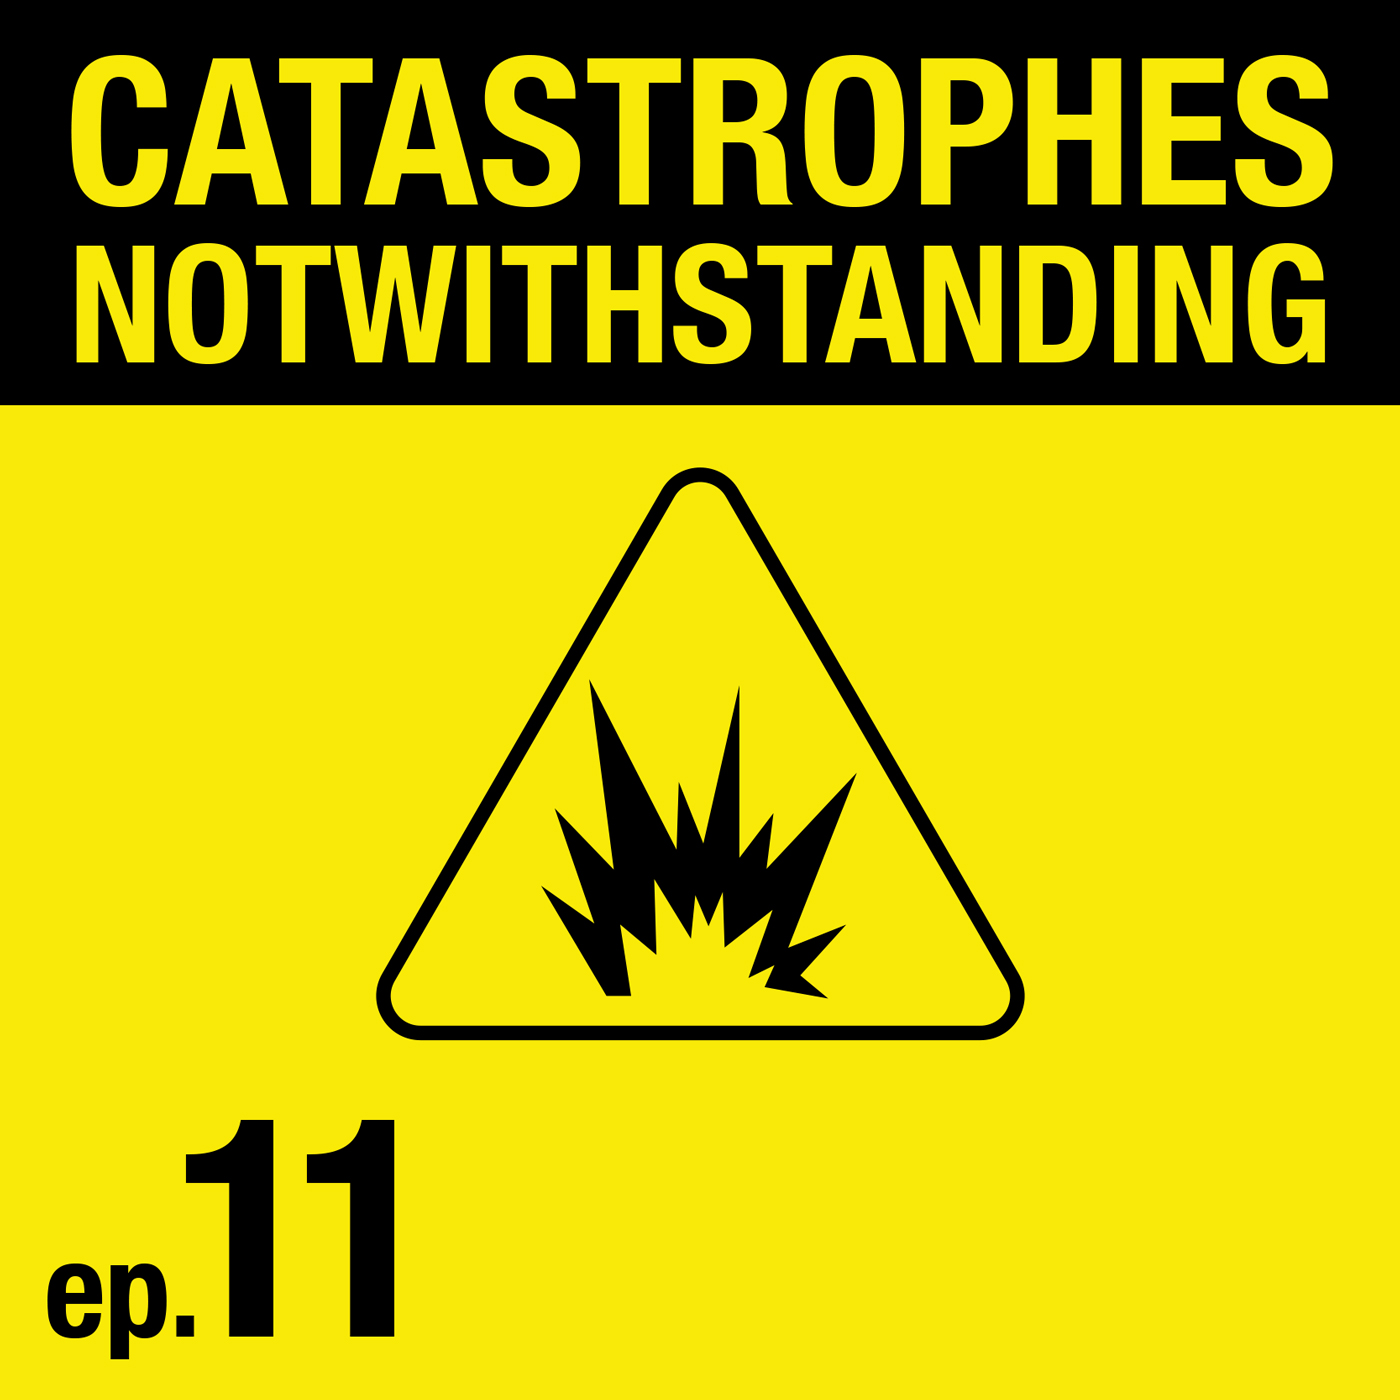 Cover Image of Catastrophes Notwithstanding Episode 11